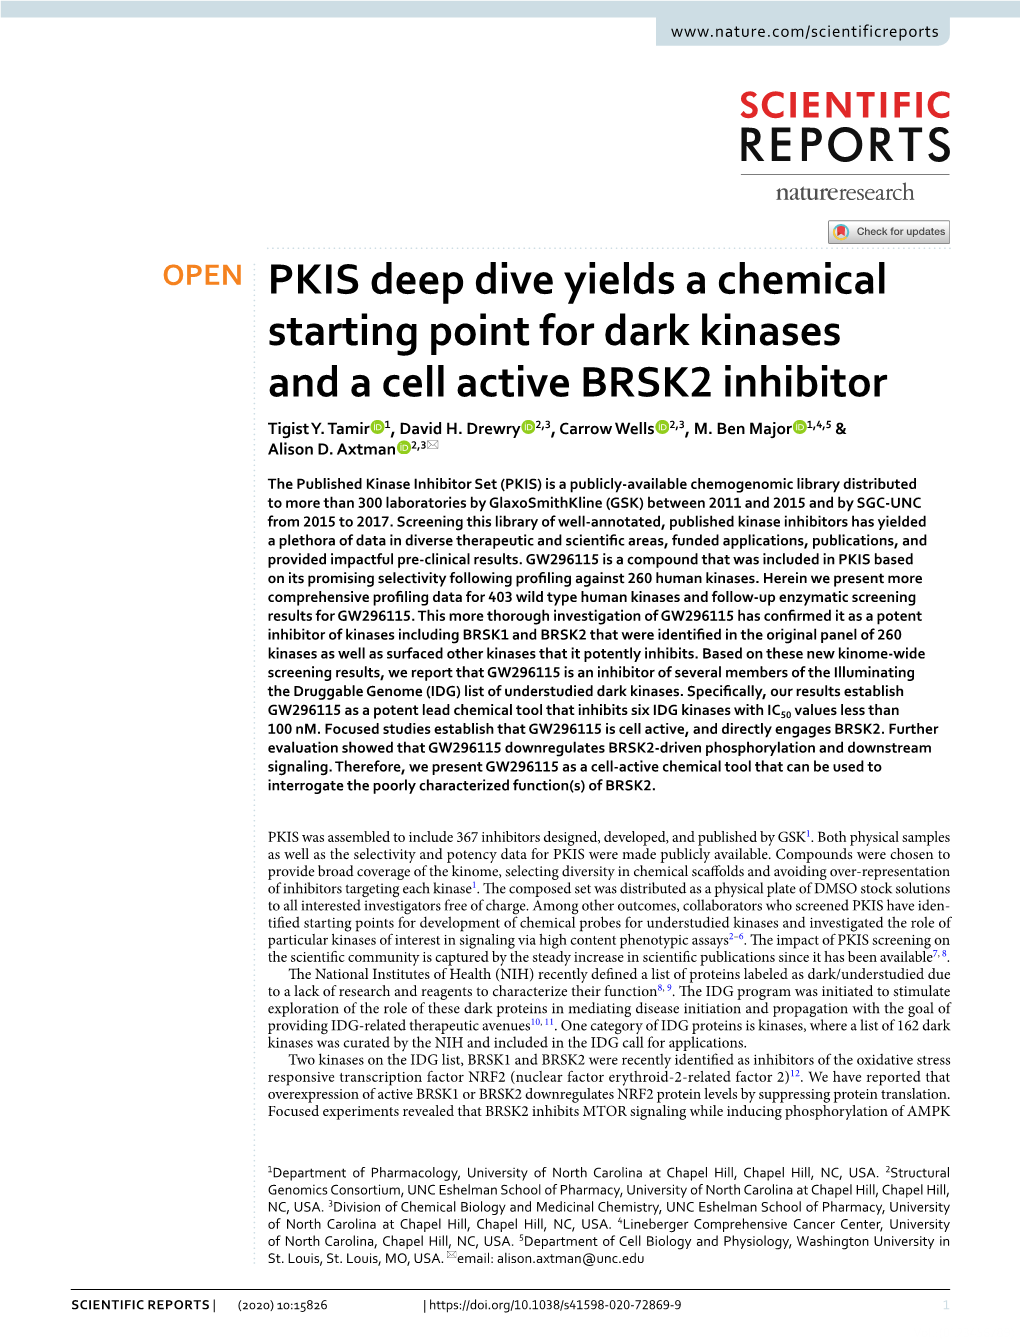 PKIS Deep Dive Yields a Chemical Starting Point for Dark Kinases and a Cell Active BRSK2 Inhibitor Tigist Y